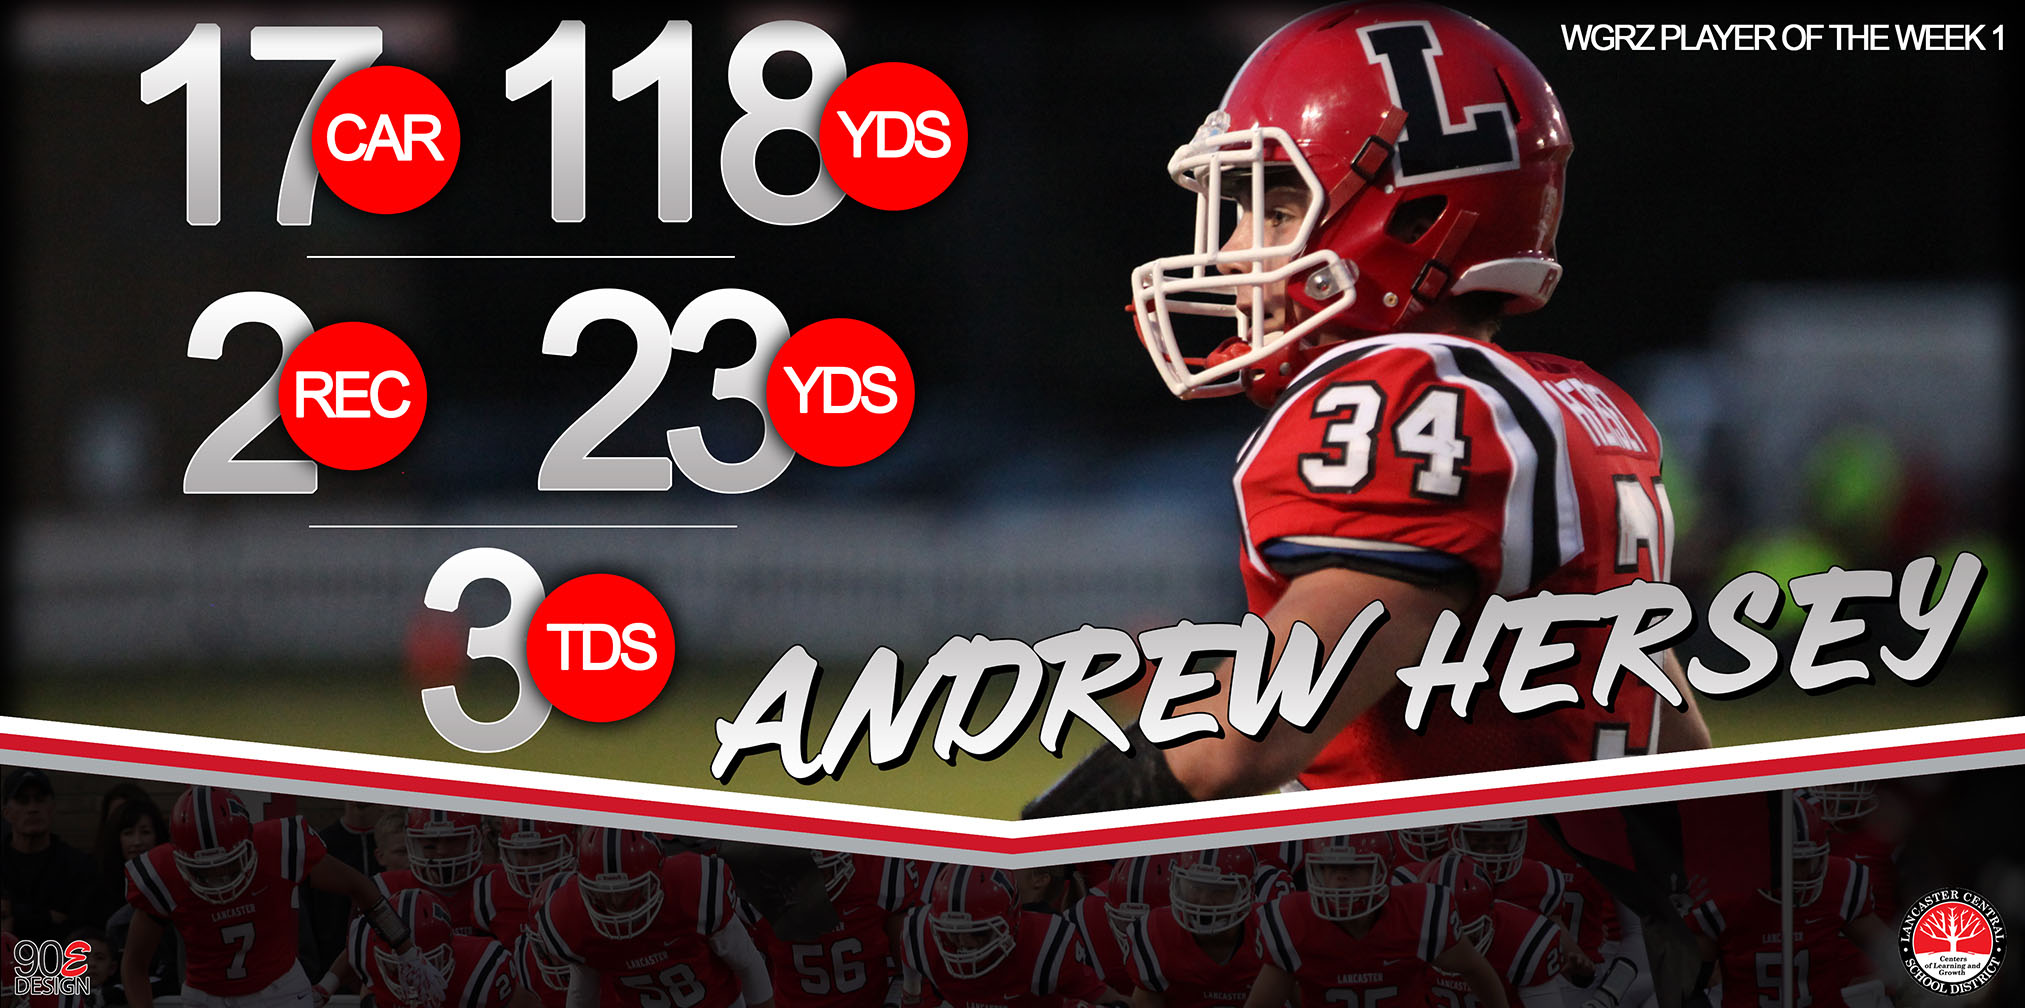 Andrew Hersey is the WGRZ Player of the Week for Week 1